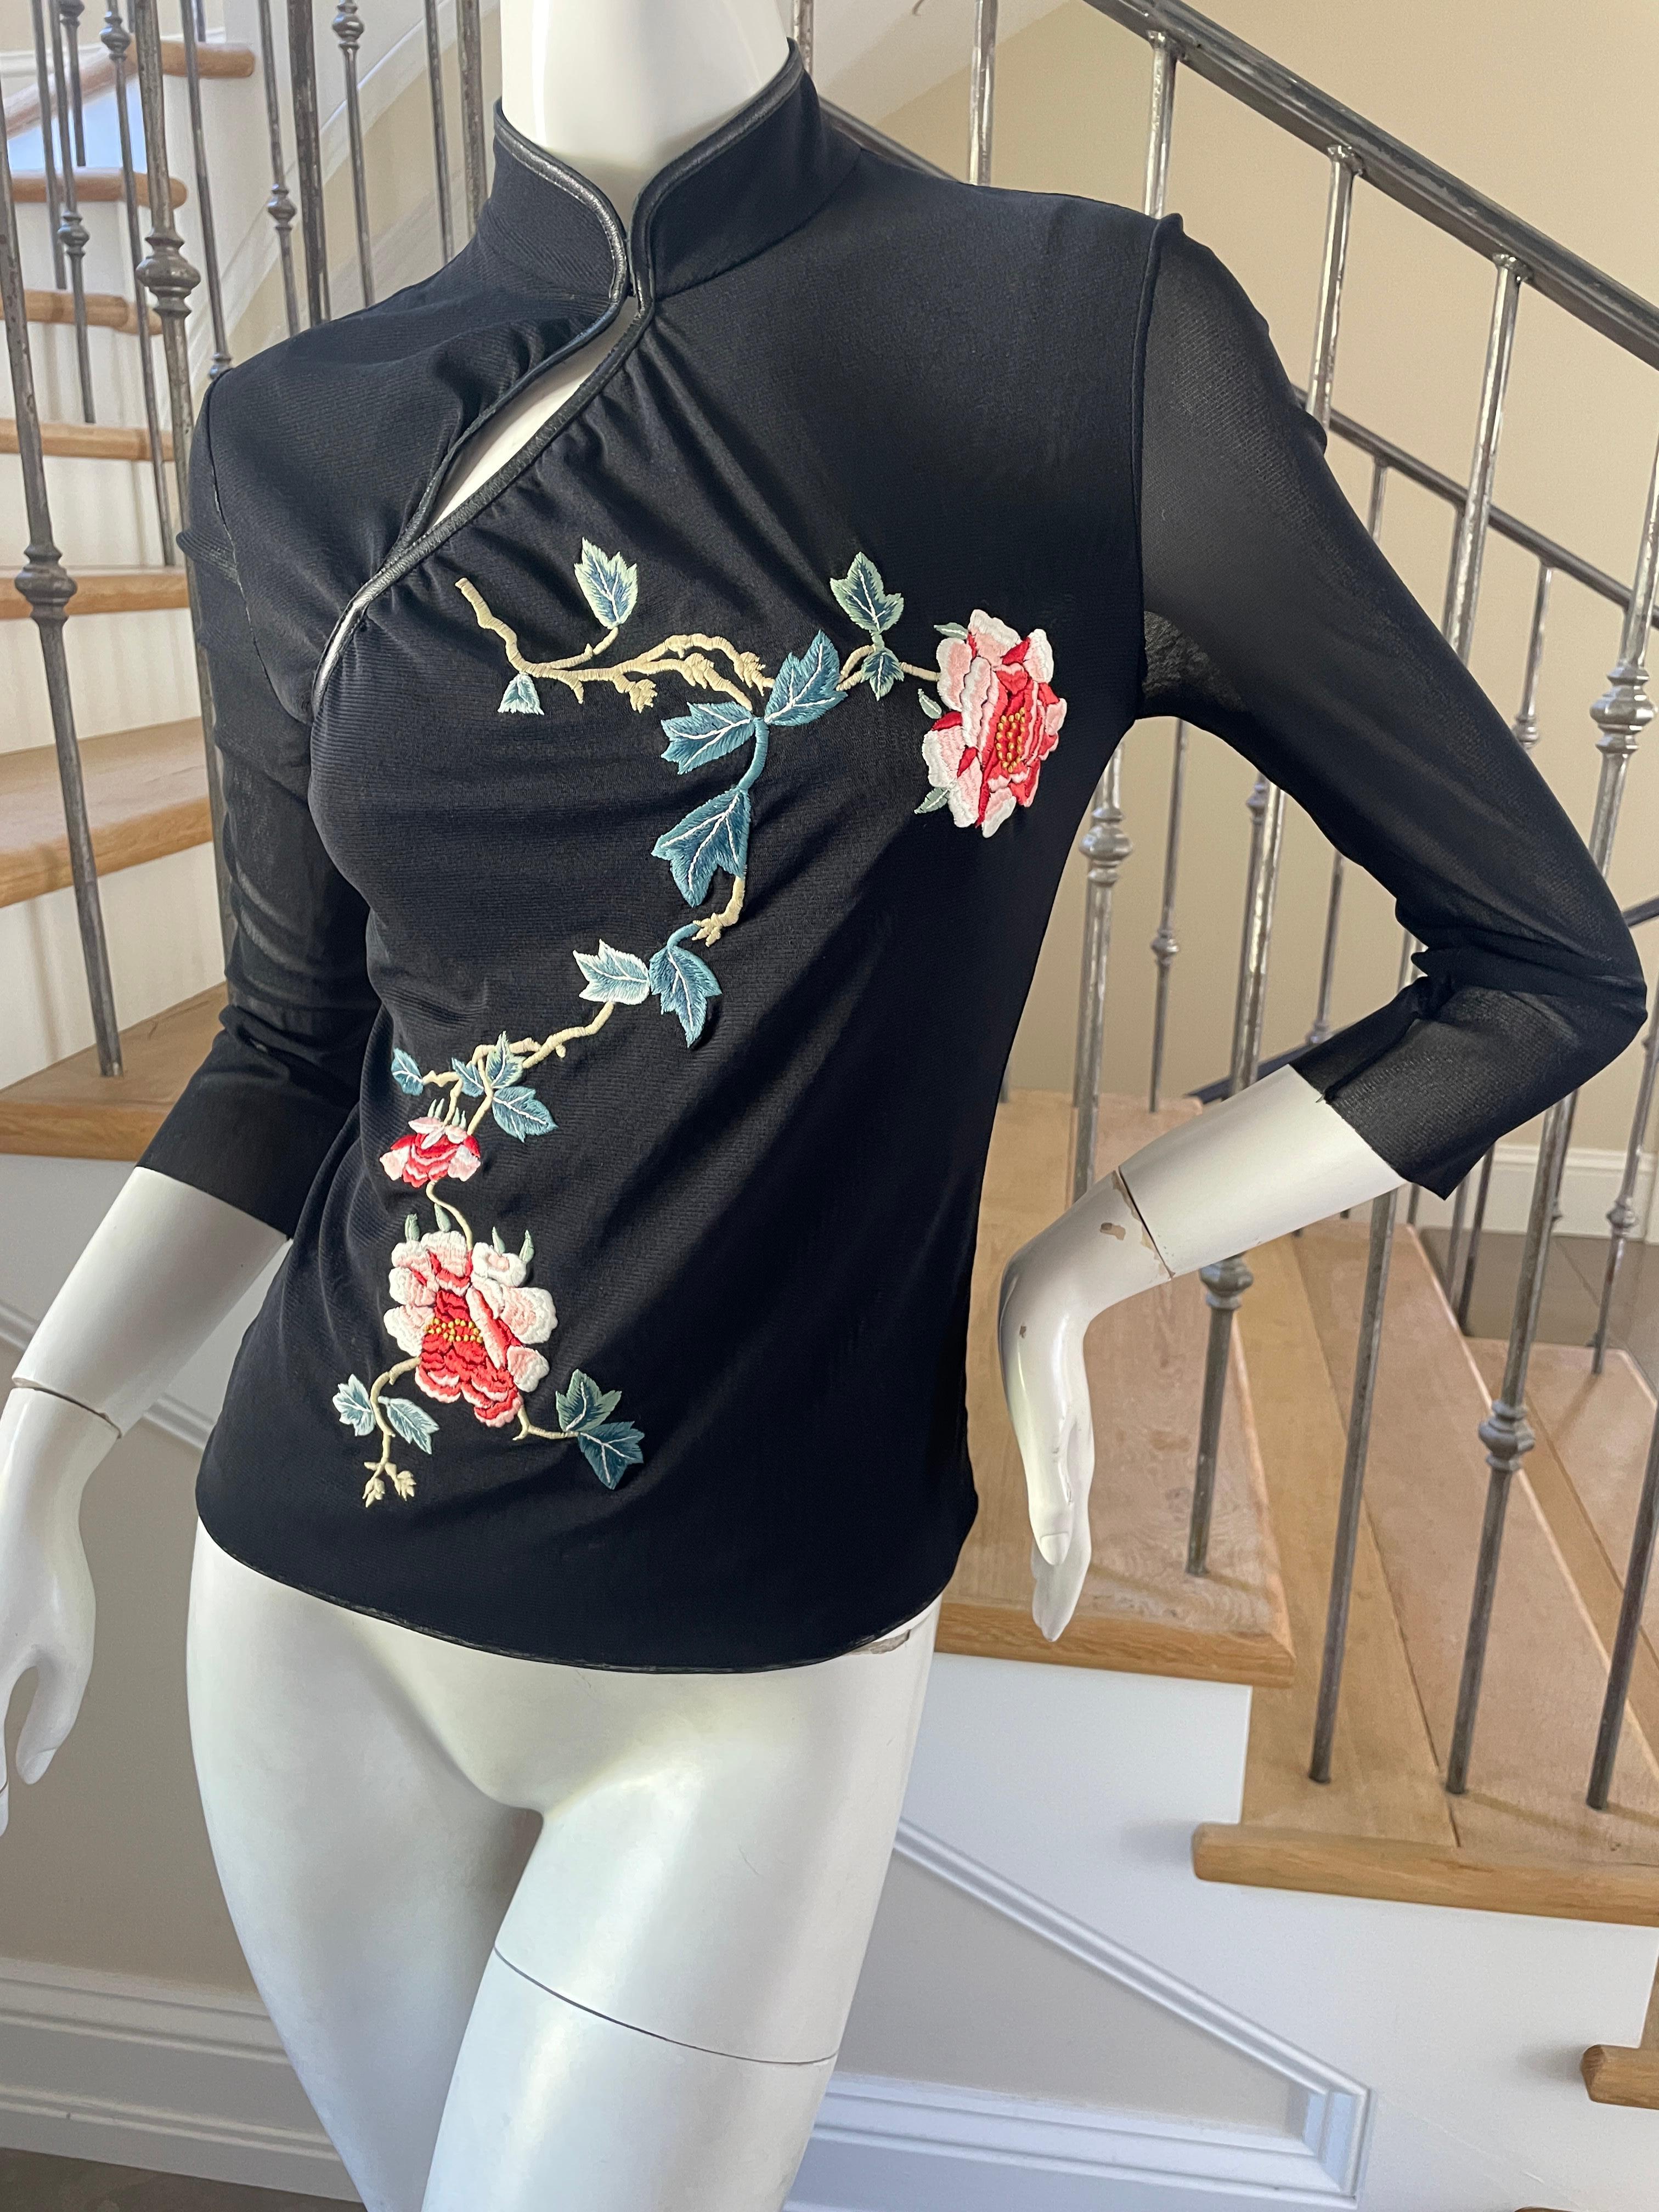 Vivienne Tam Vintage Cheongsam Style Black Top with Embroidered Flowers
This is such a charming piece.
Size 1
Bust 32